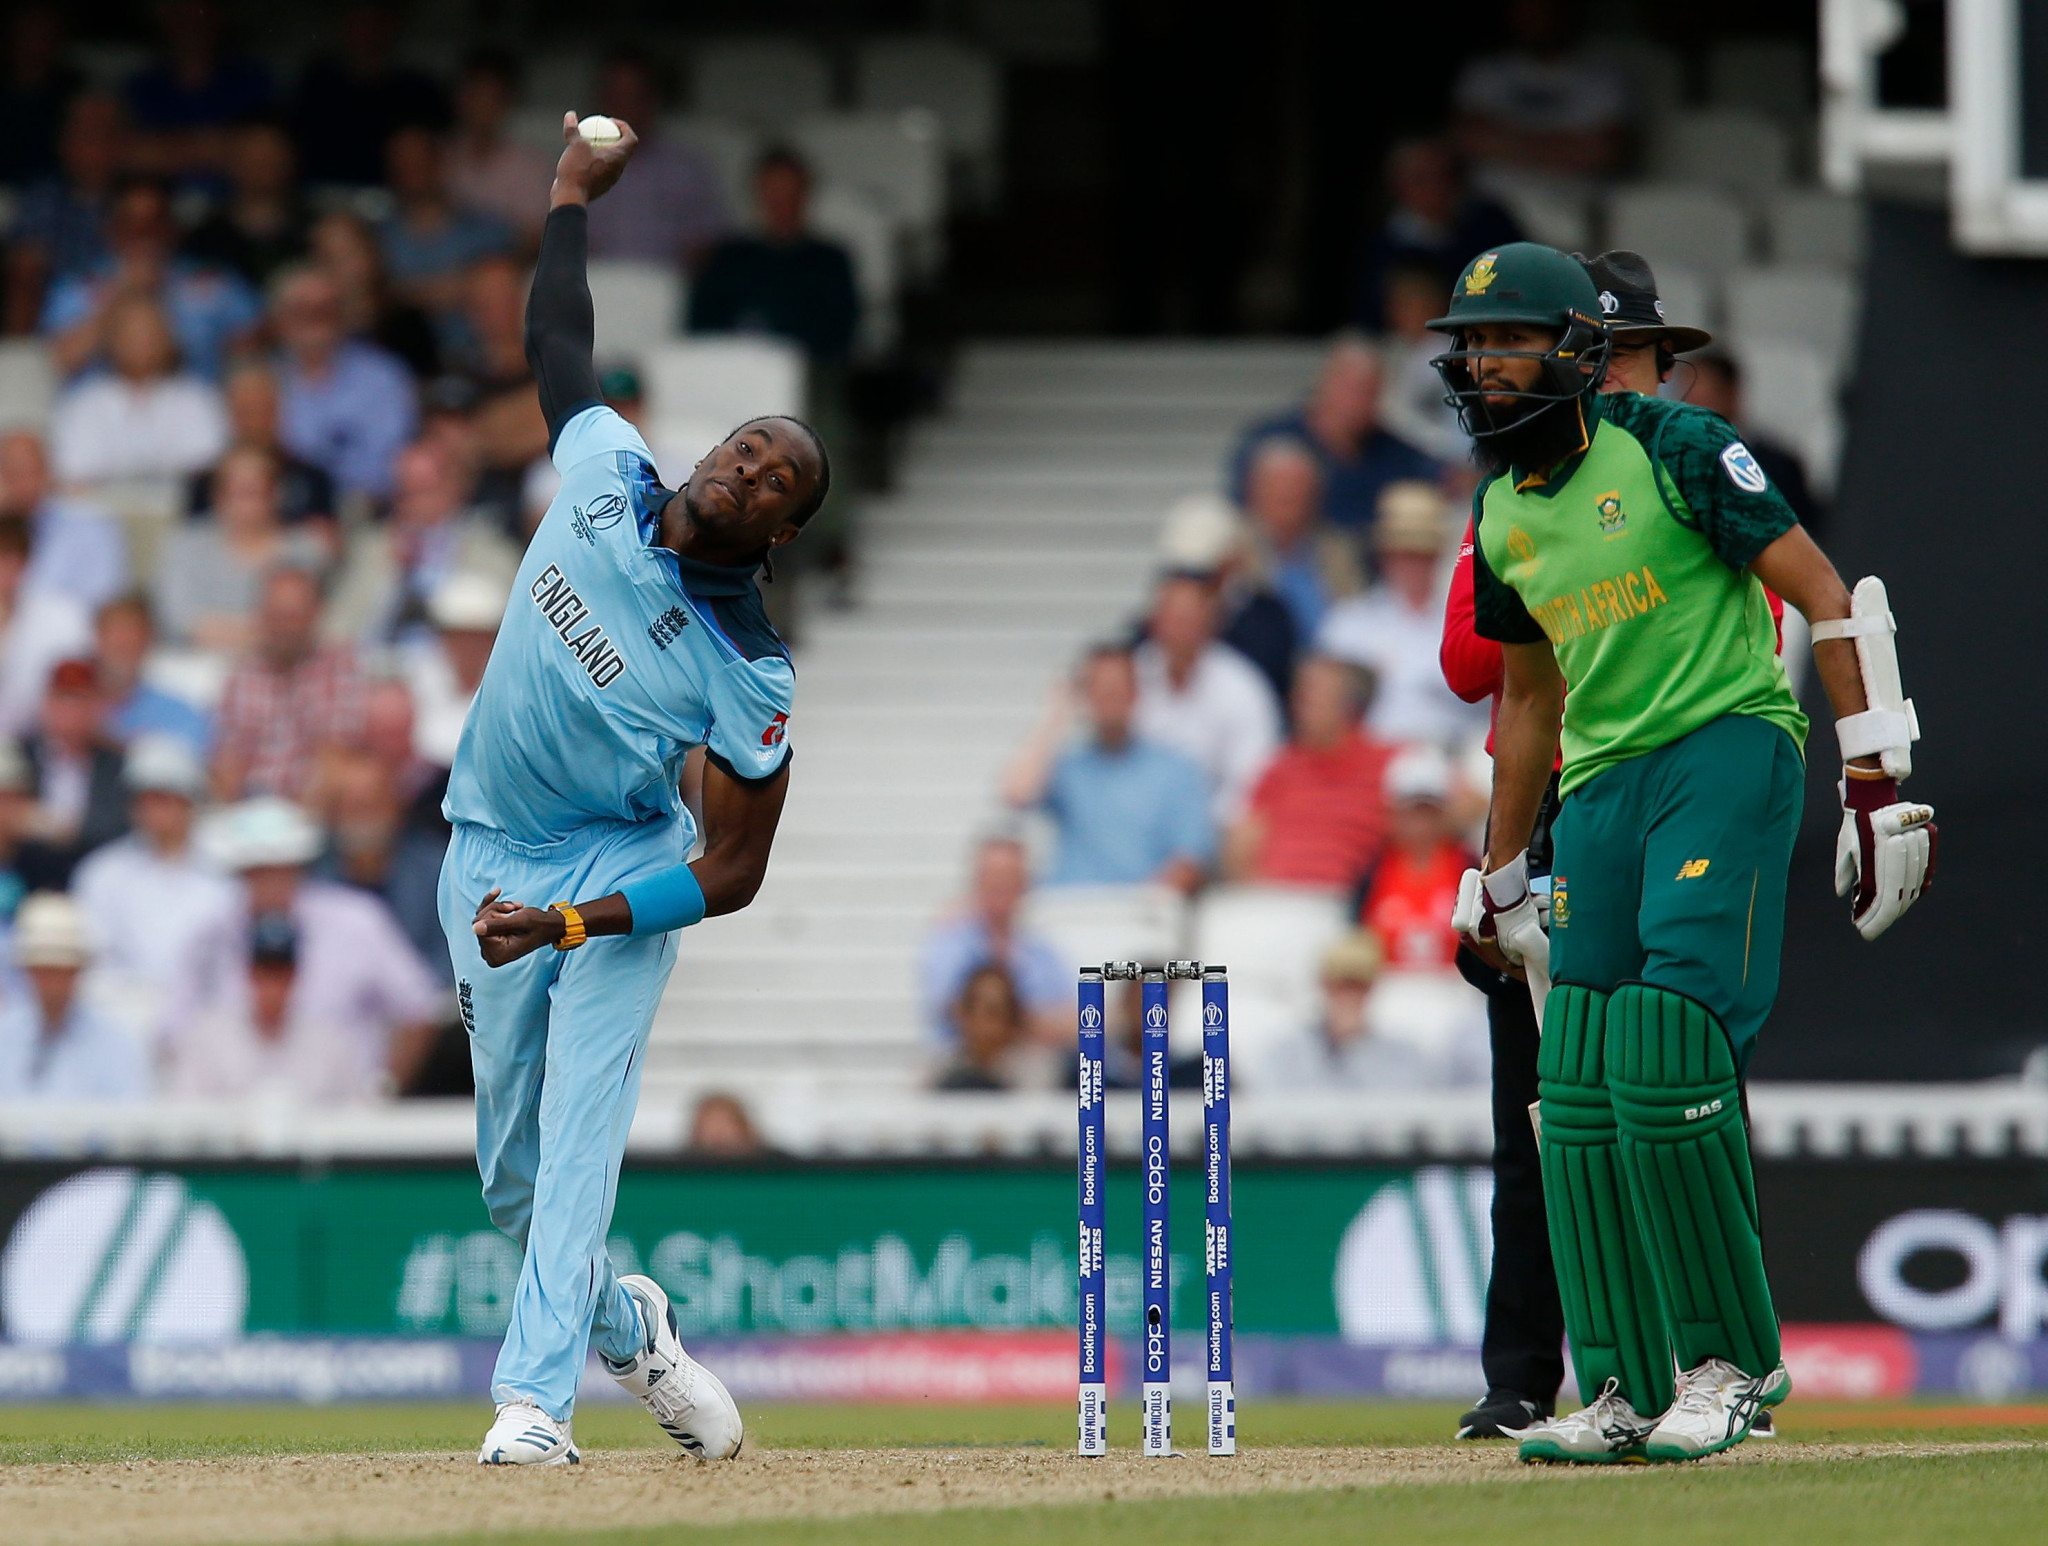 England defeat South Africa in ICC Cricket World Cup opener